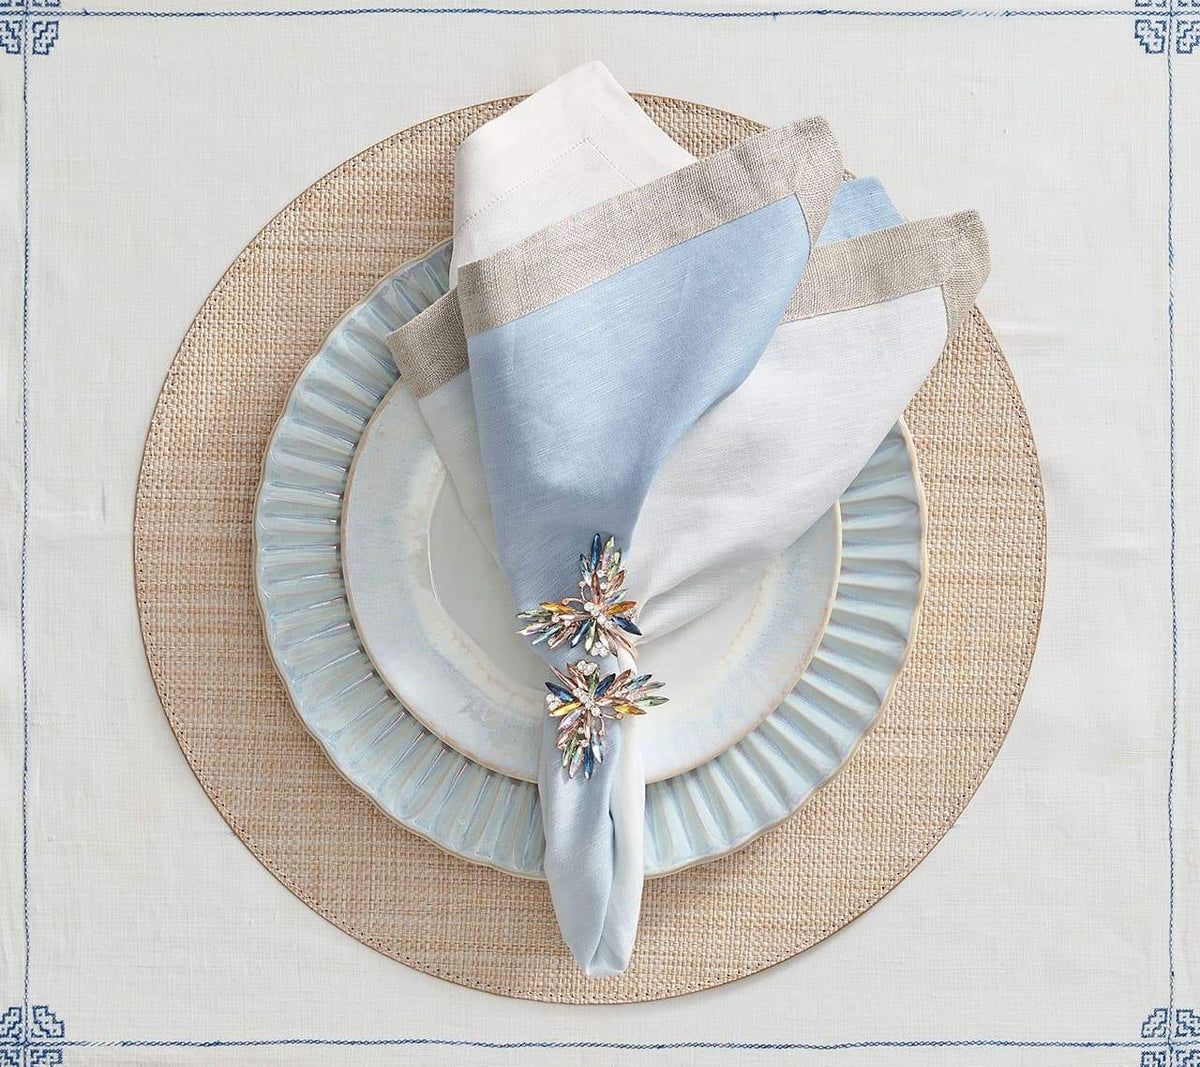 Round Portofino Placemat in natural underneath blue and white plates topped with a blue & white napkin